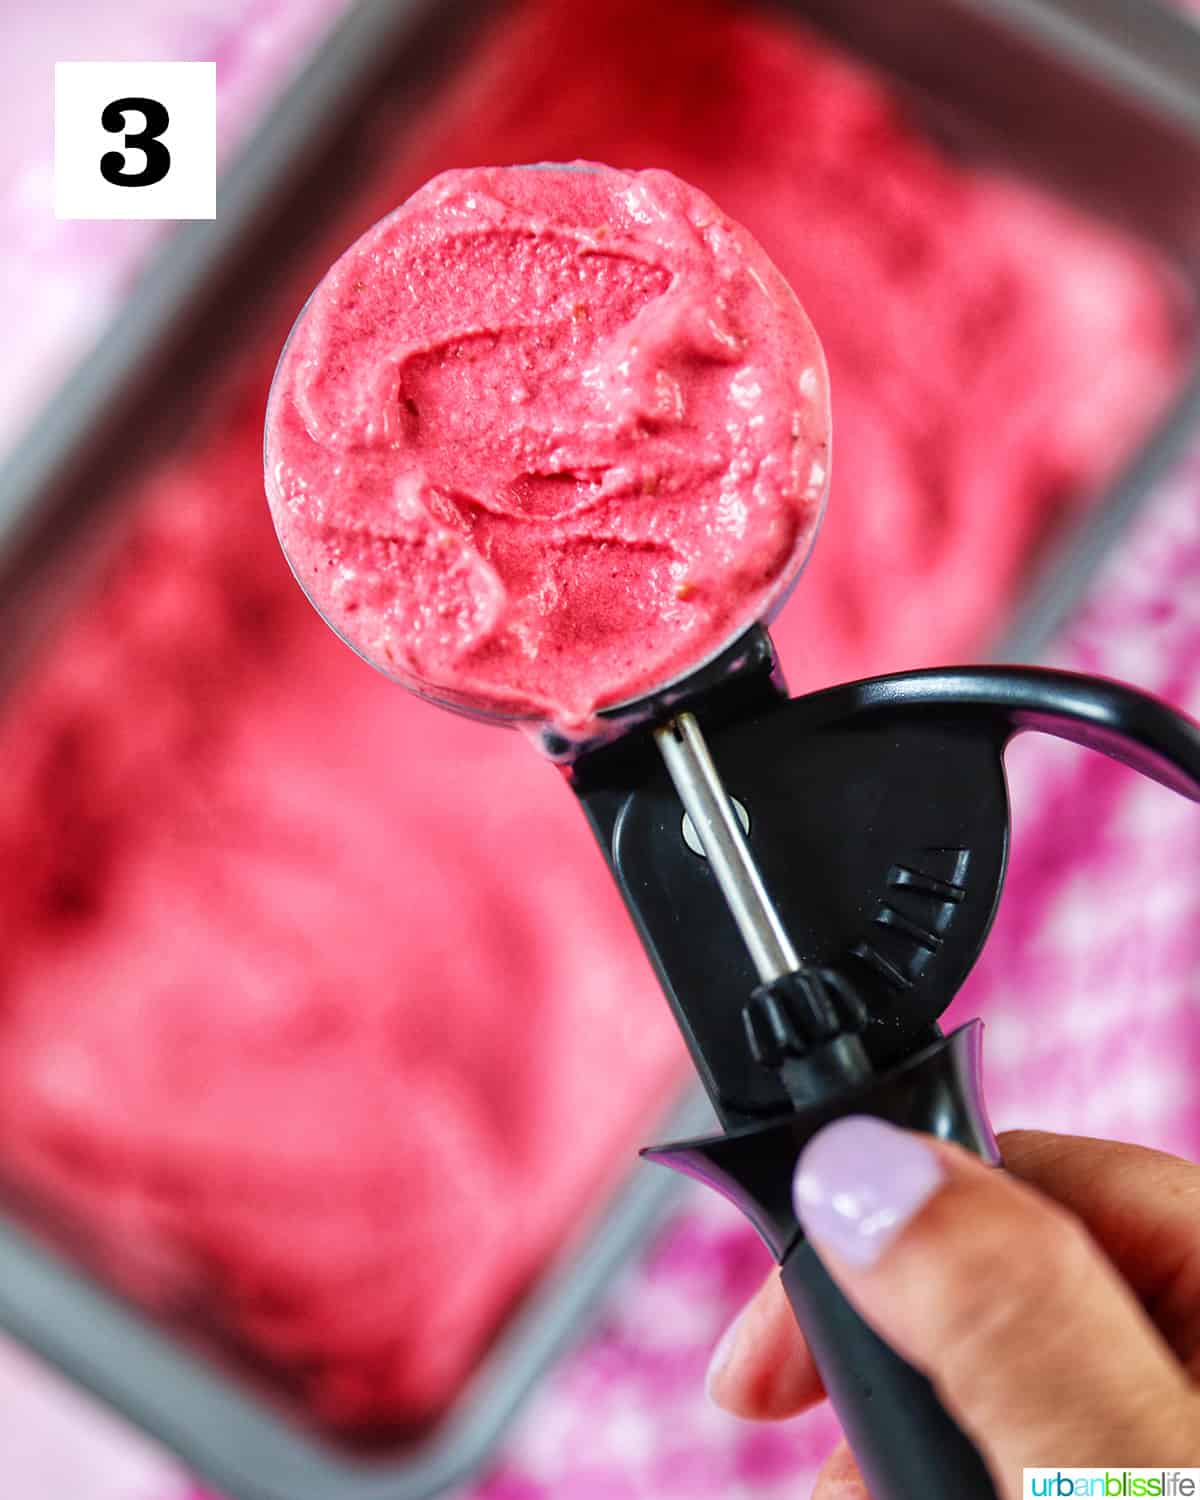 large ice cream scoop filled with raspberry sherbet over a pan filled with more raspberry sherbet blurred in the background.